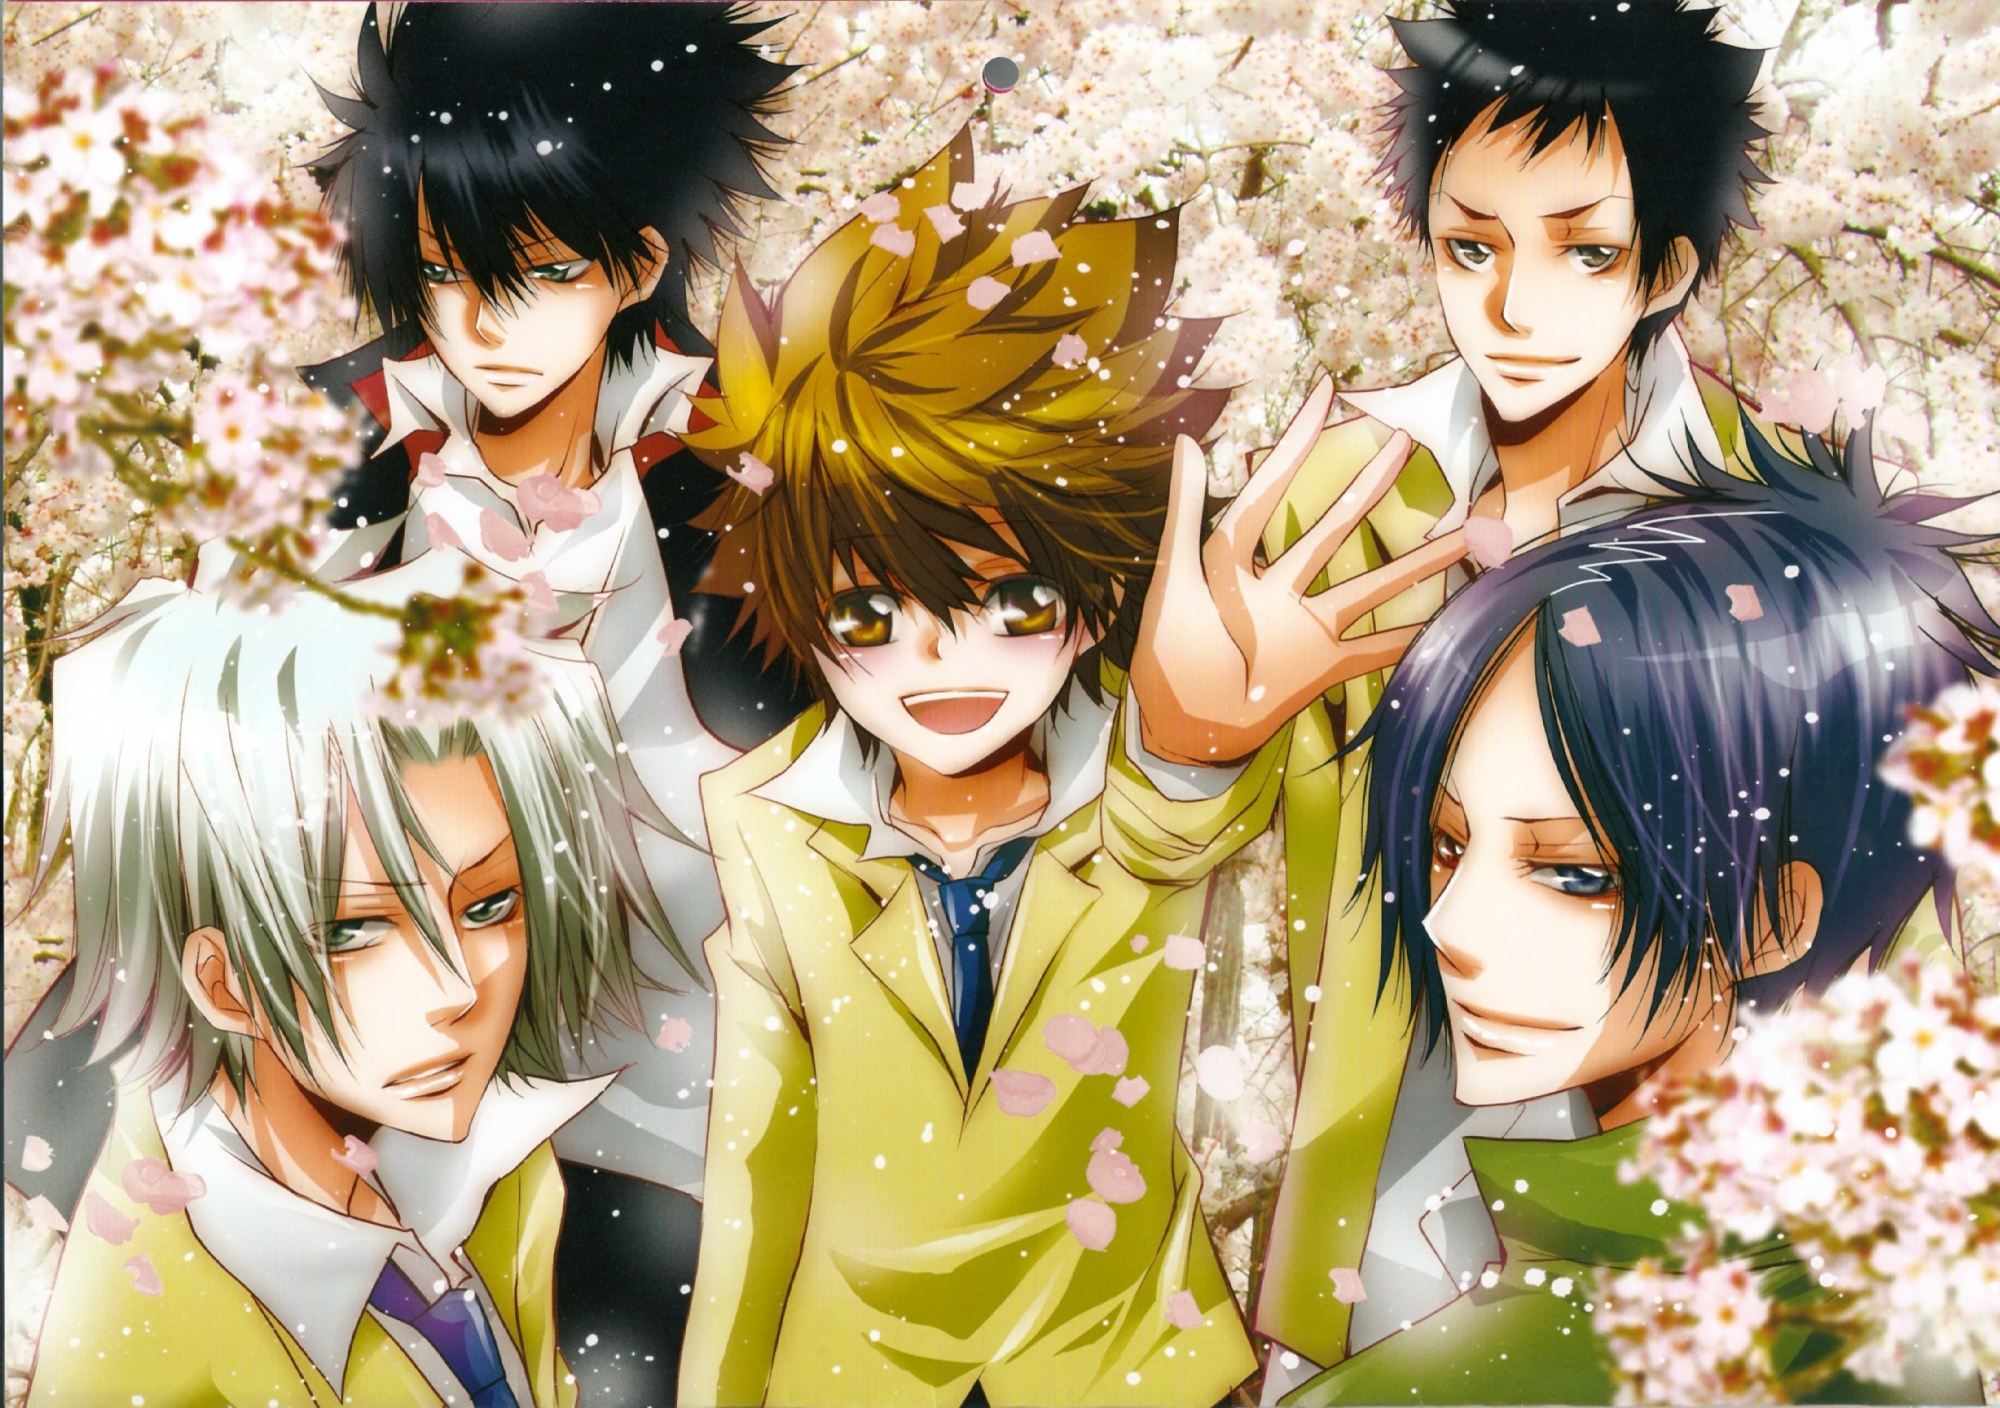 Anime characters from Katekyō Hitman Reborn! posing together as Vongola Boys.